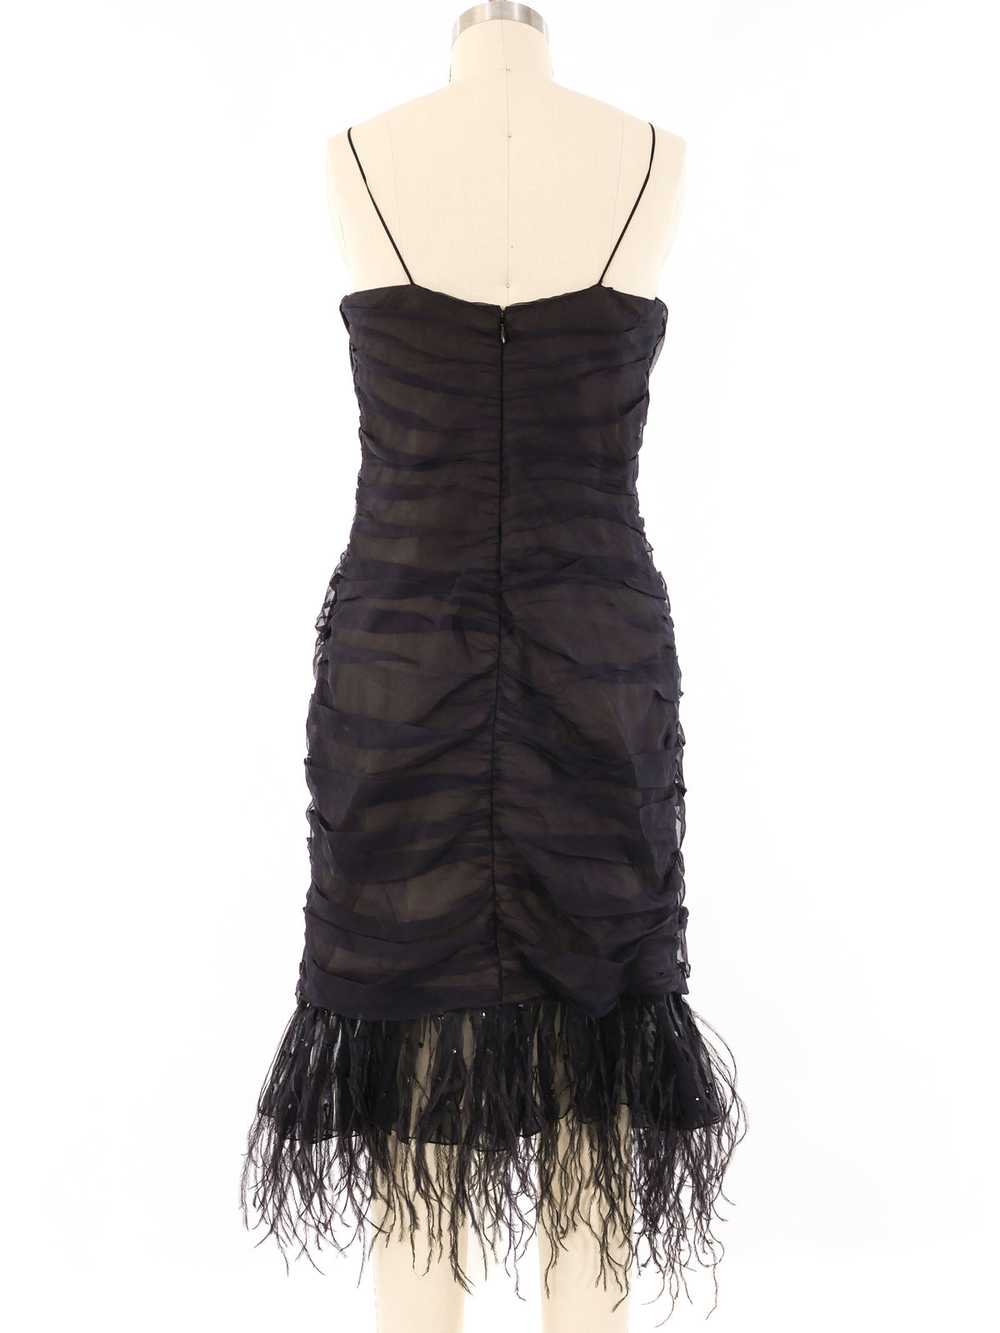 Balmain Feather Trimmed Ruched Chiffon Dress - image 3